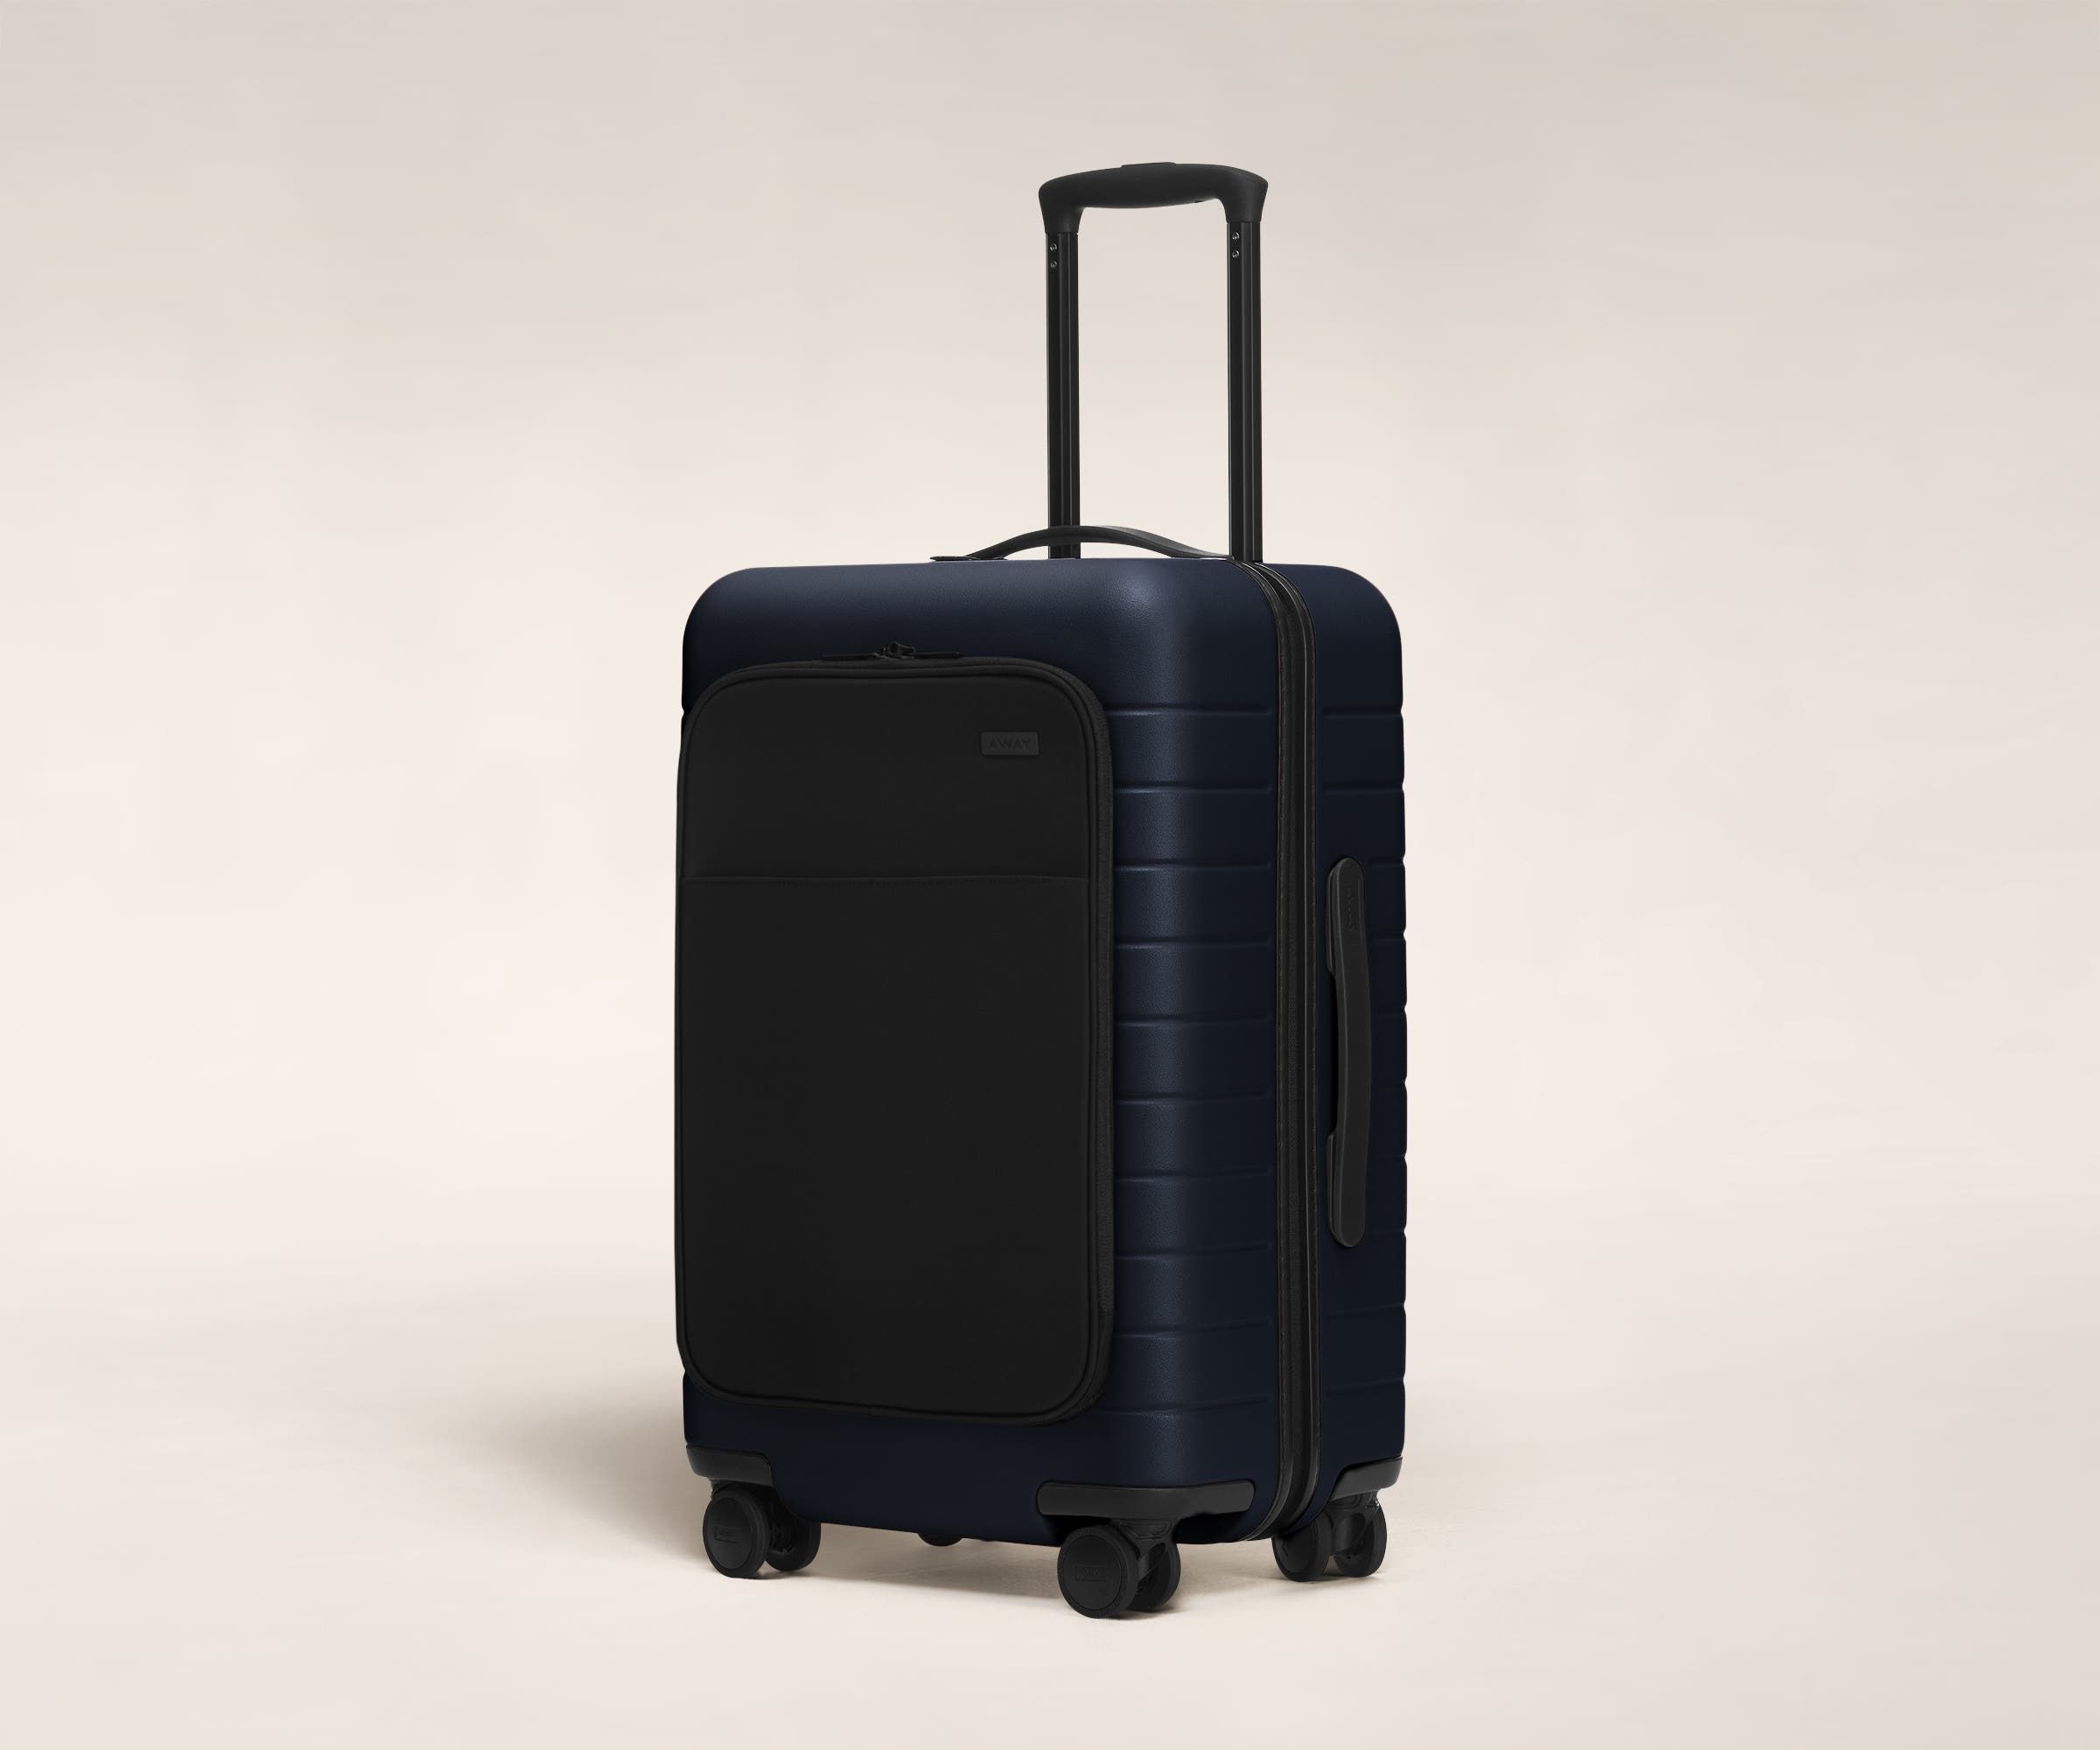 The Bigger Carry-On with Pocket